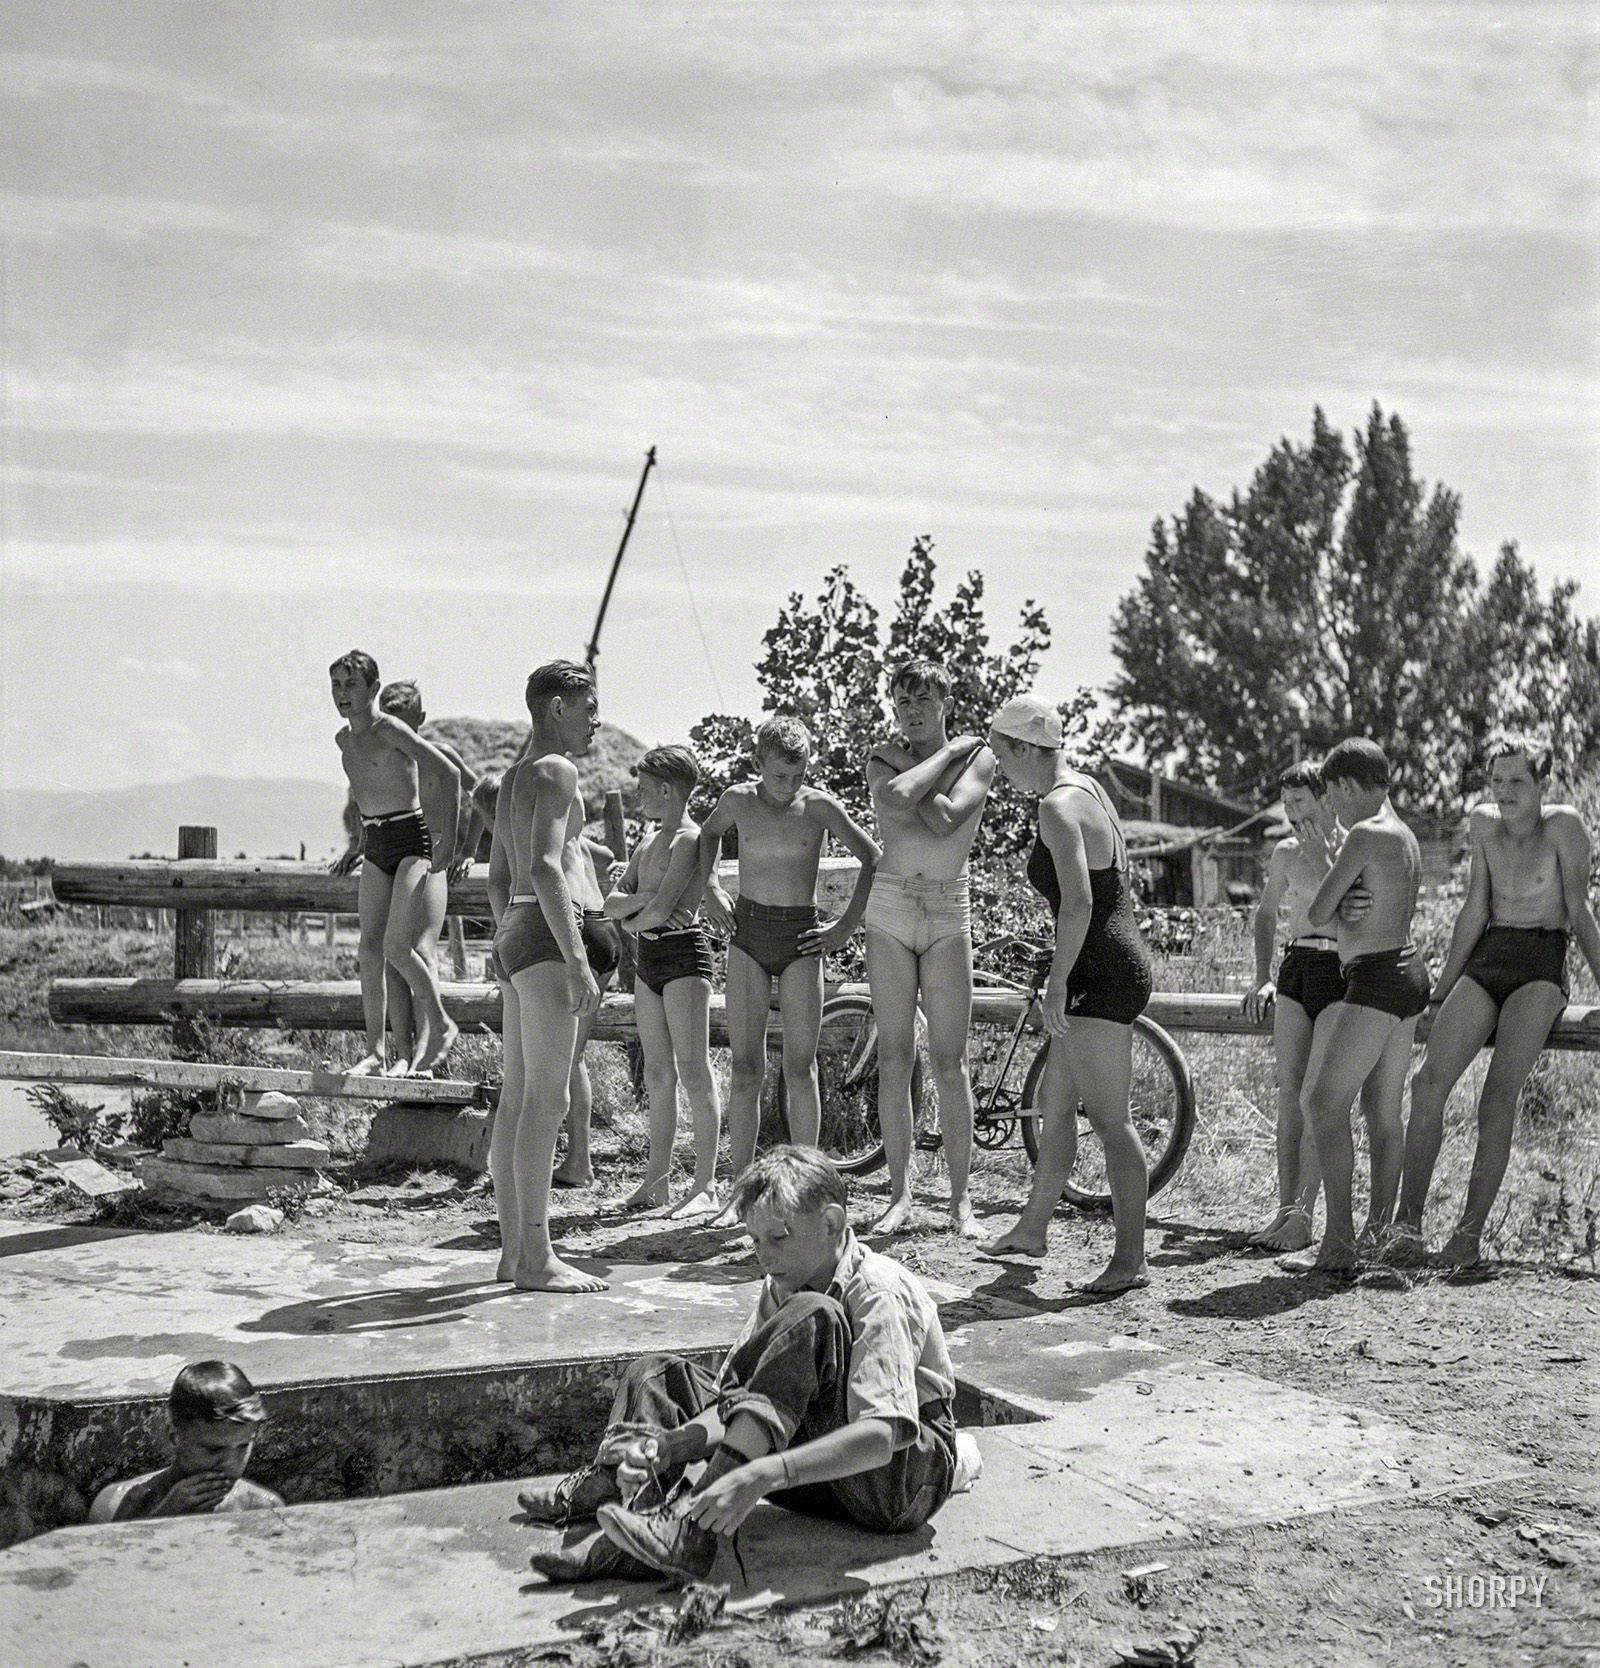 July 1942. "Rupert, Idaho. Dressing after swimming." Medium format negative by Russell Lee for the Office of War Information. View full size.